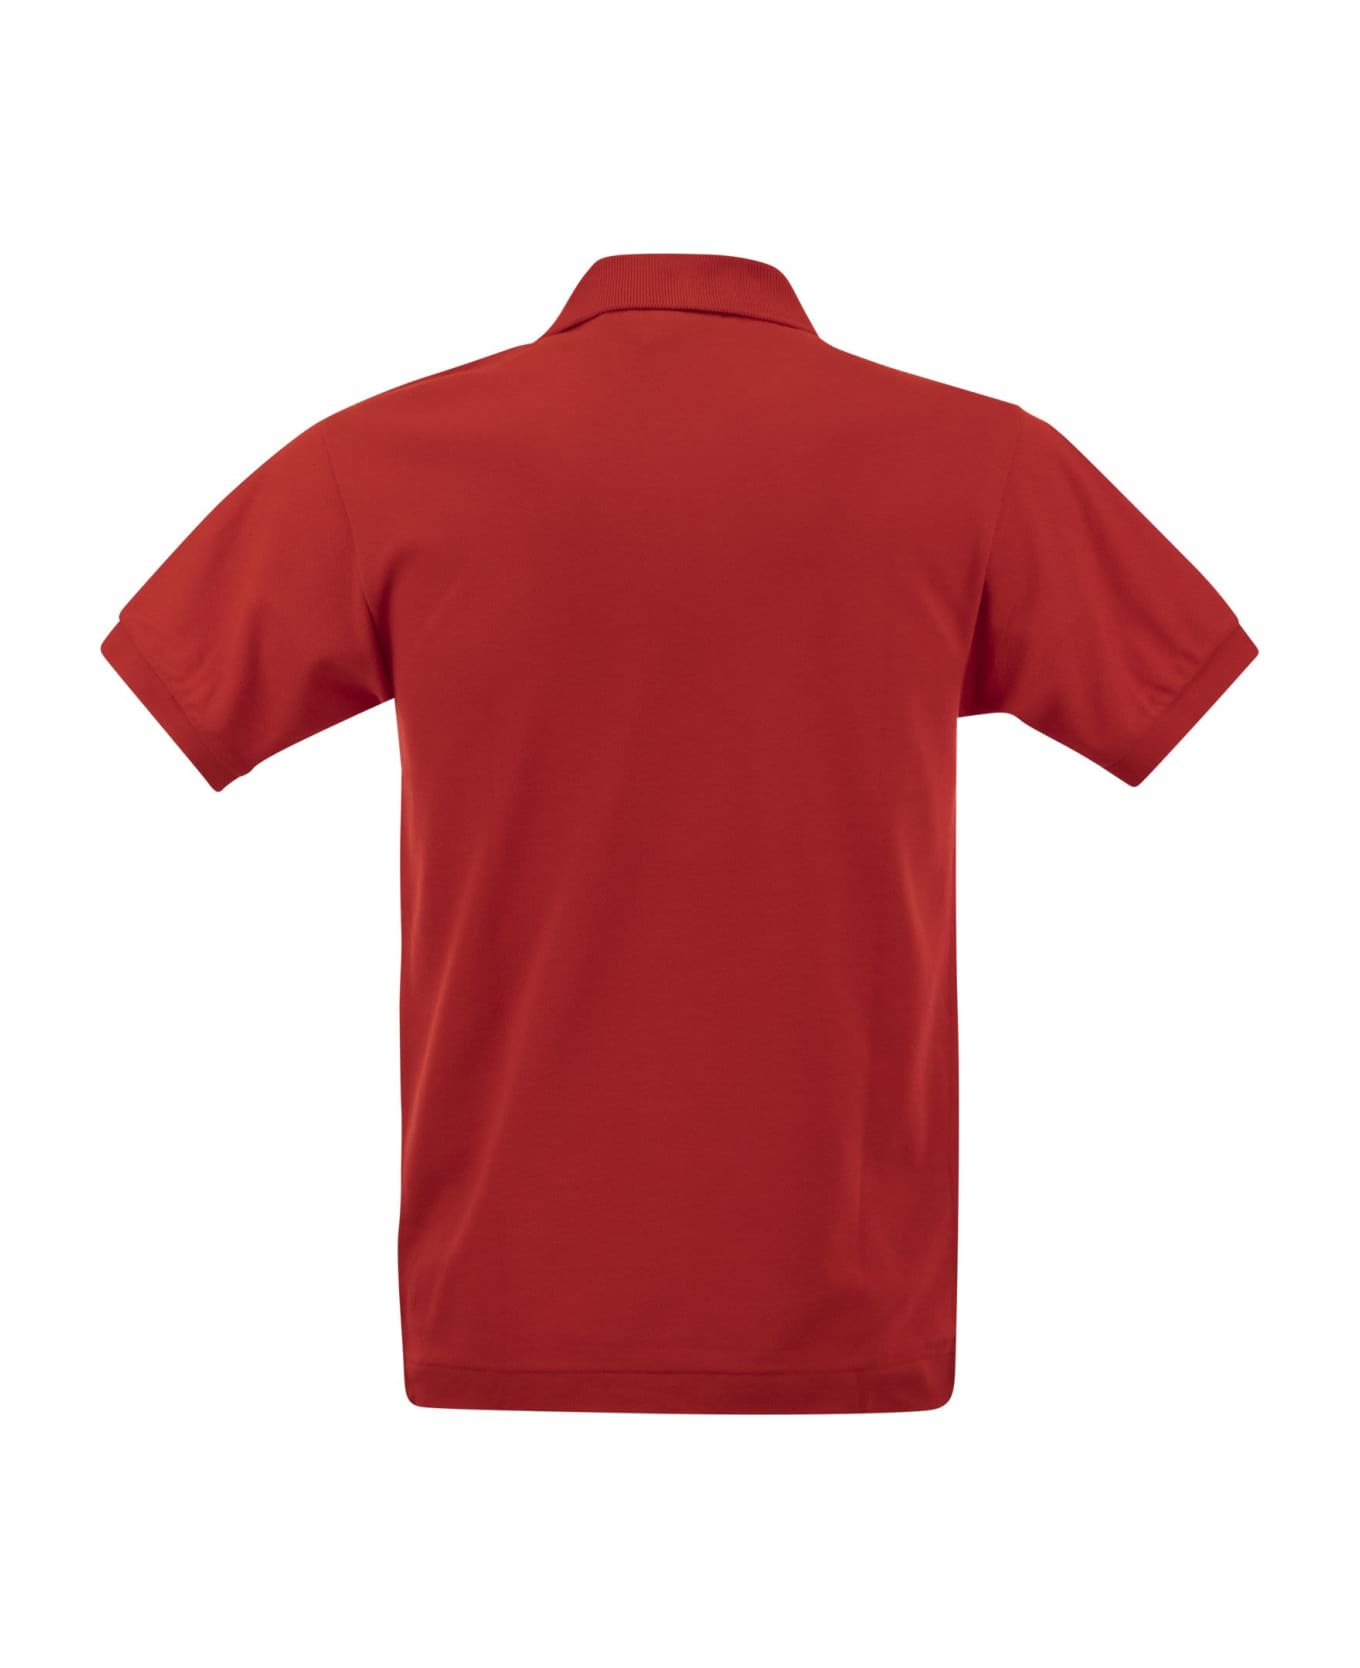 Lacoste Classic Fit Cotton Pique Polo Shirt - Red